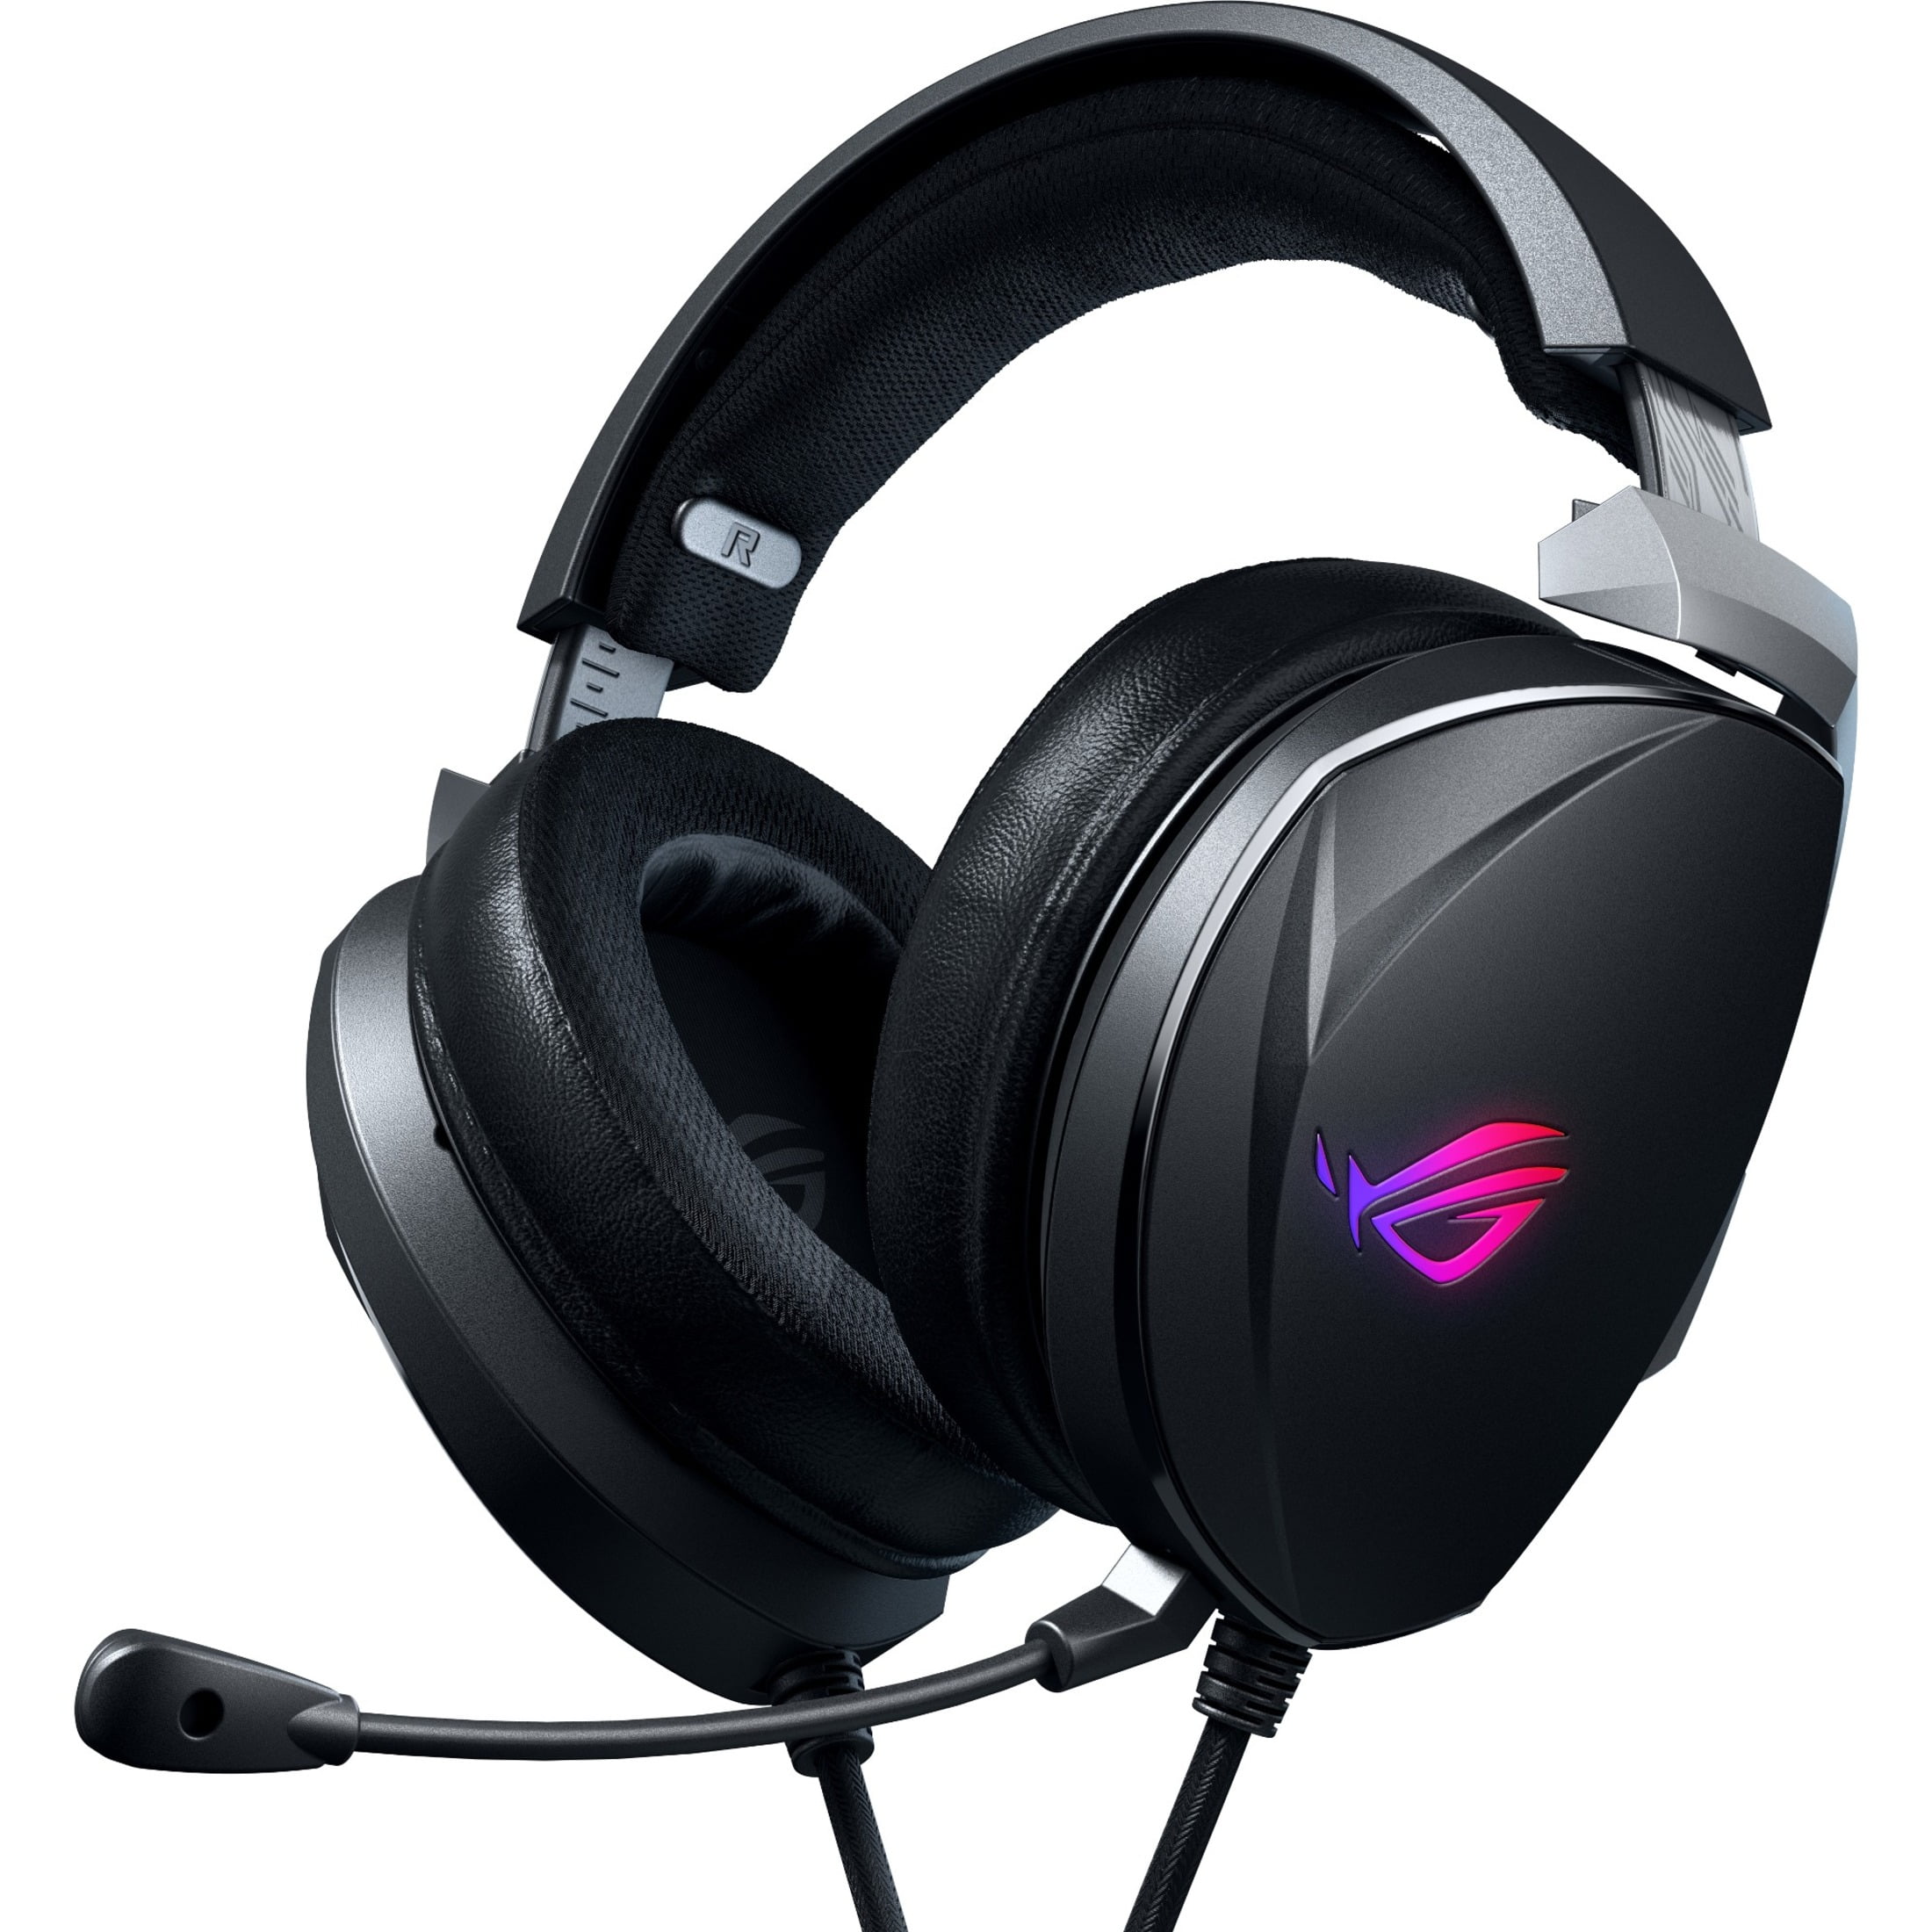 Asus ROG Theta 7.1 Gaming Headsets - Headsets or Surround System?